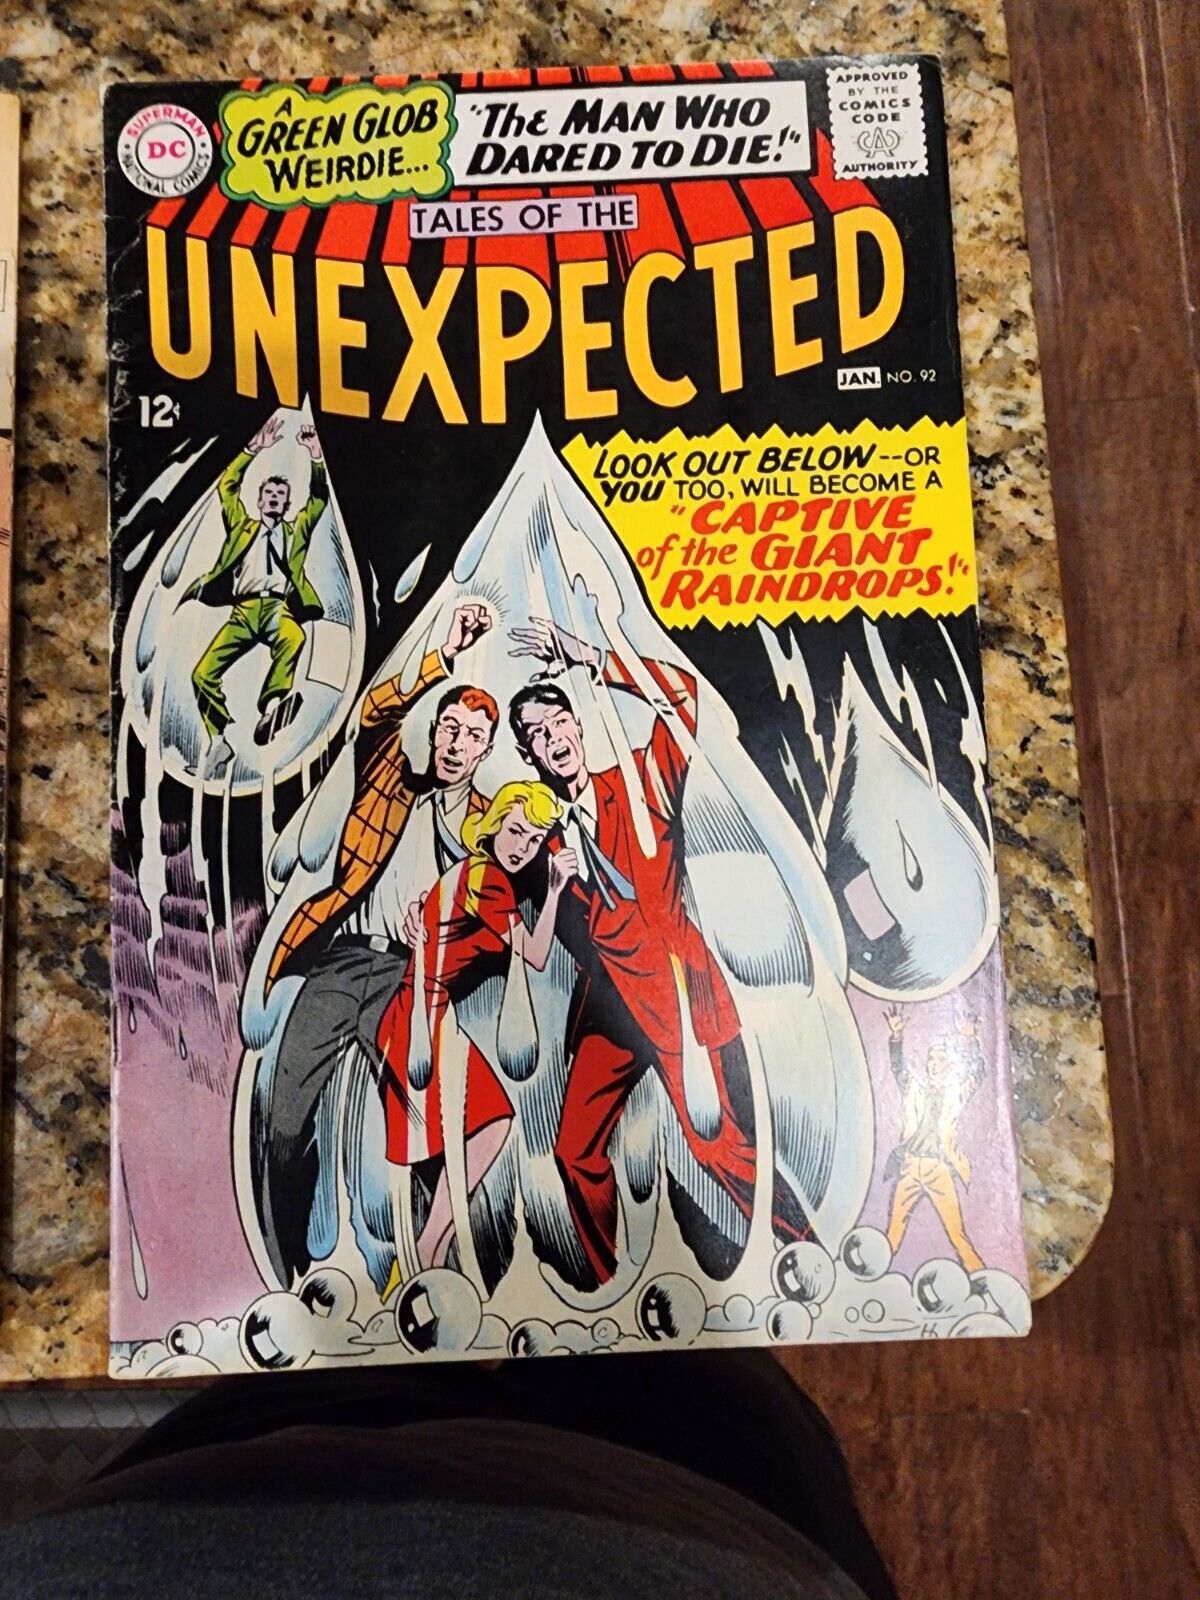 Tales of the Unexpected #92  Comic Book